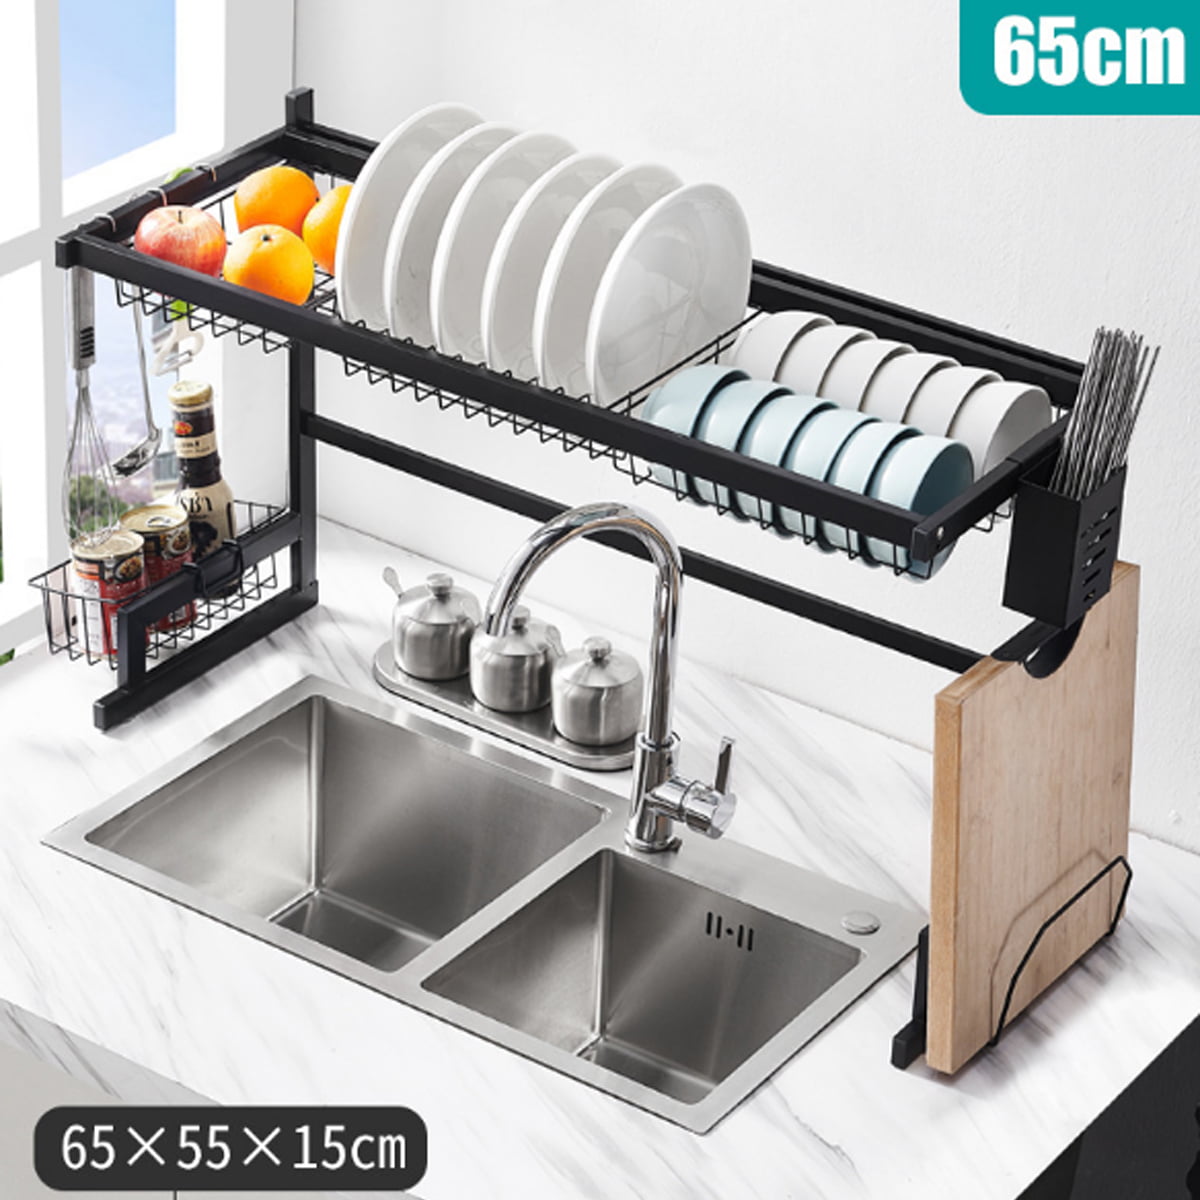 7PCS Stainless Steel Dish Drying Rack Over Sink Drainer Shelf Storage Rack,Functional  Yet Chic Design,Adjustable And Removable Parts 